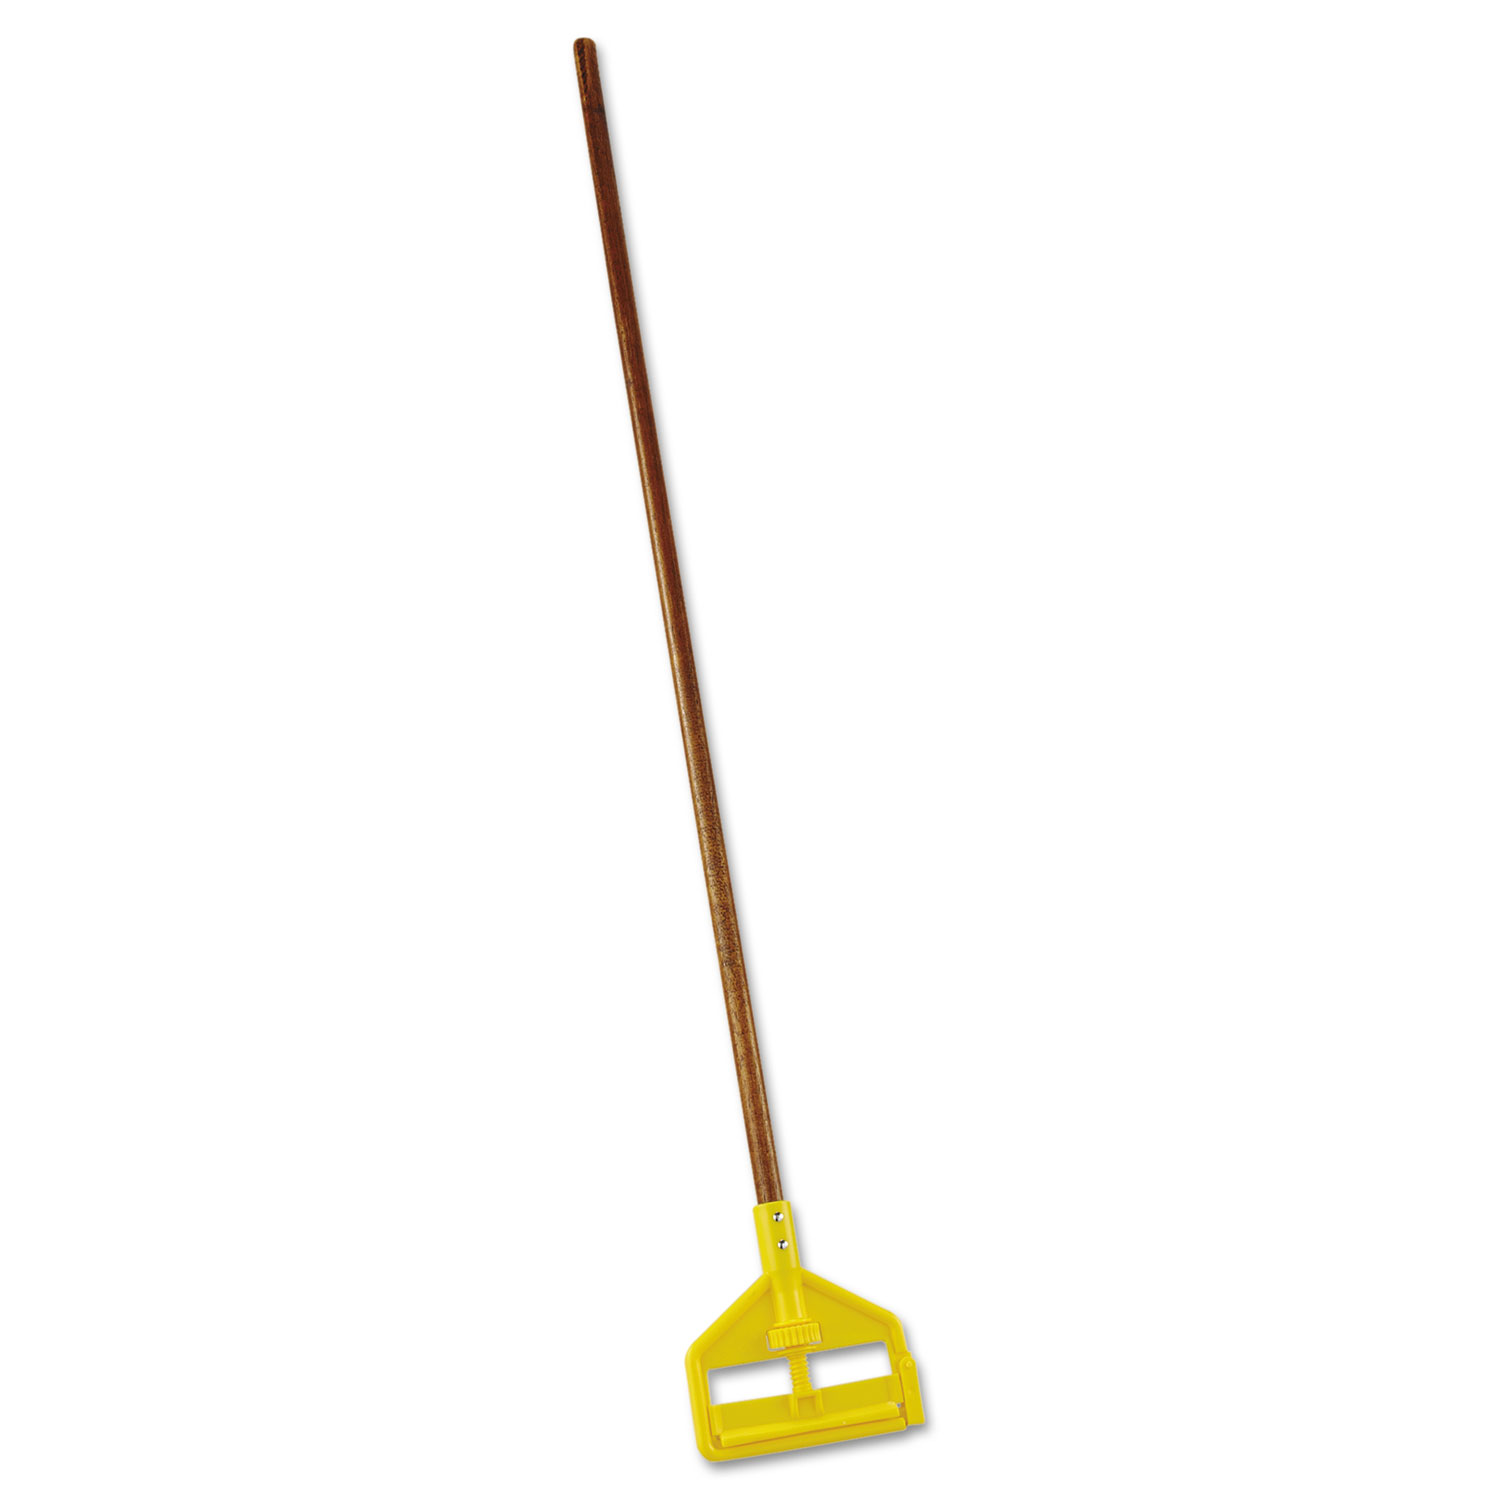 Rubbermaid Red and Yellow, Invader Fiberglass Side-Gate Wet-Mop